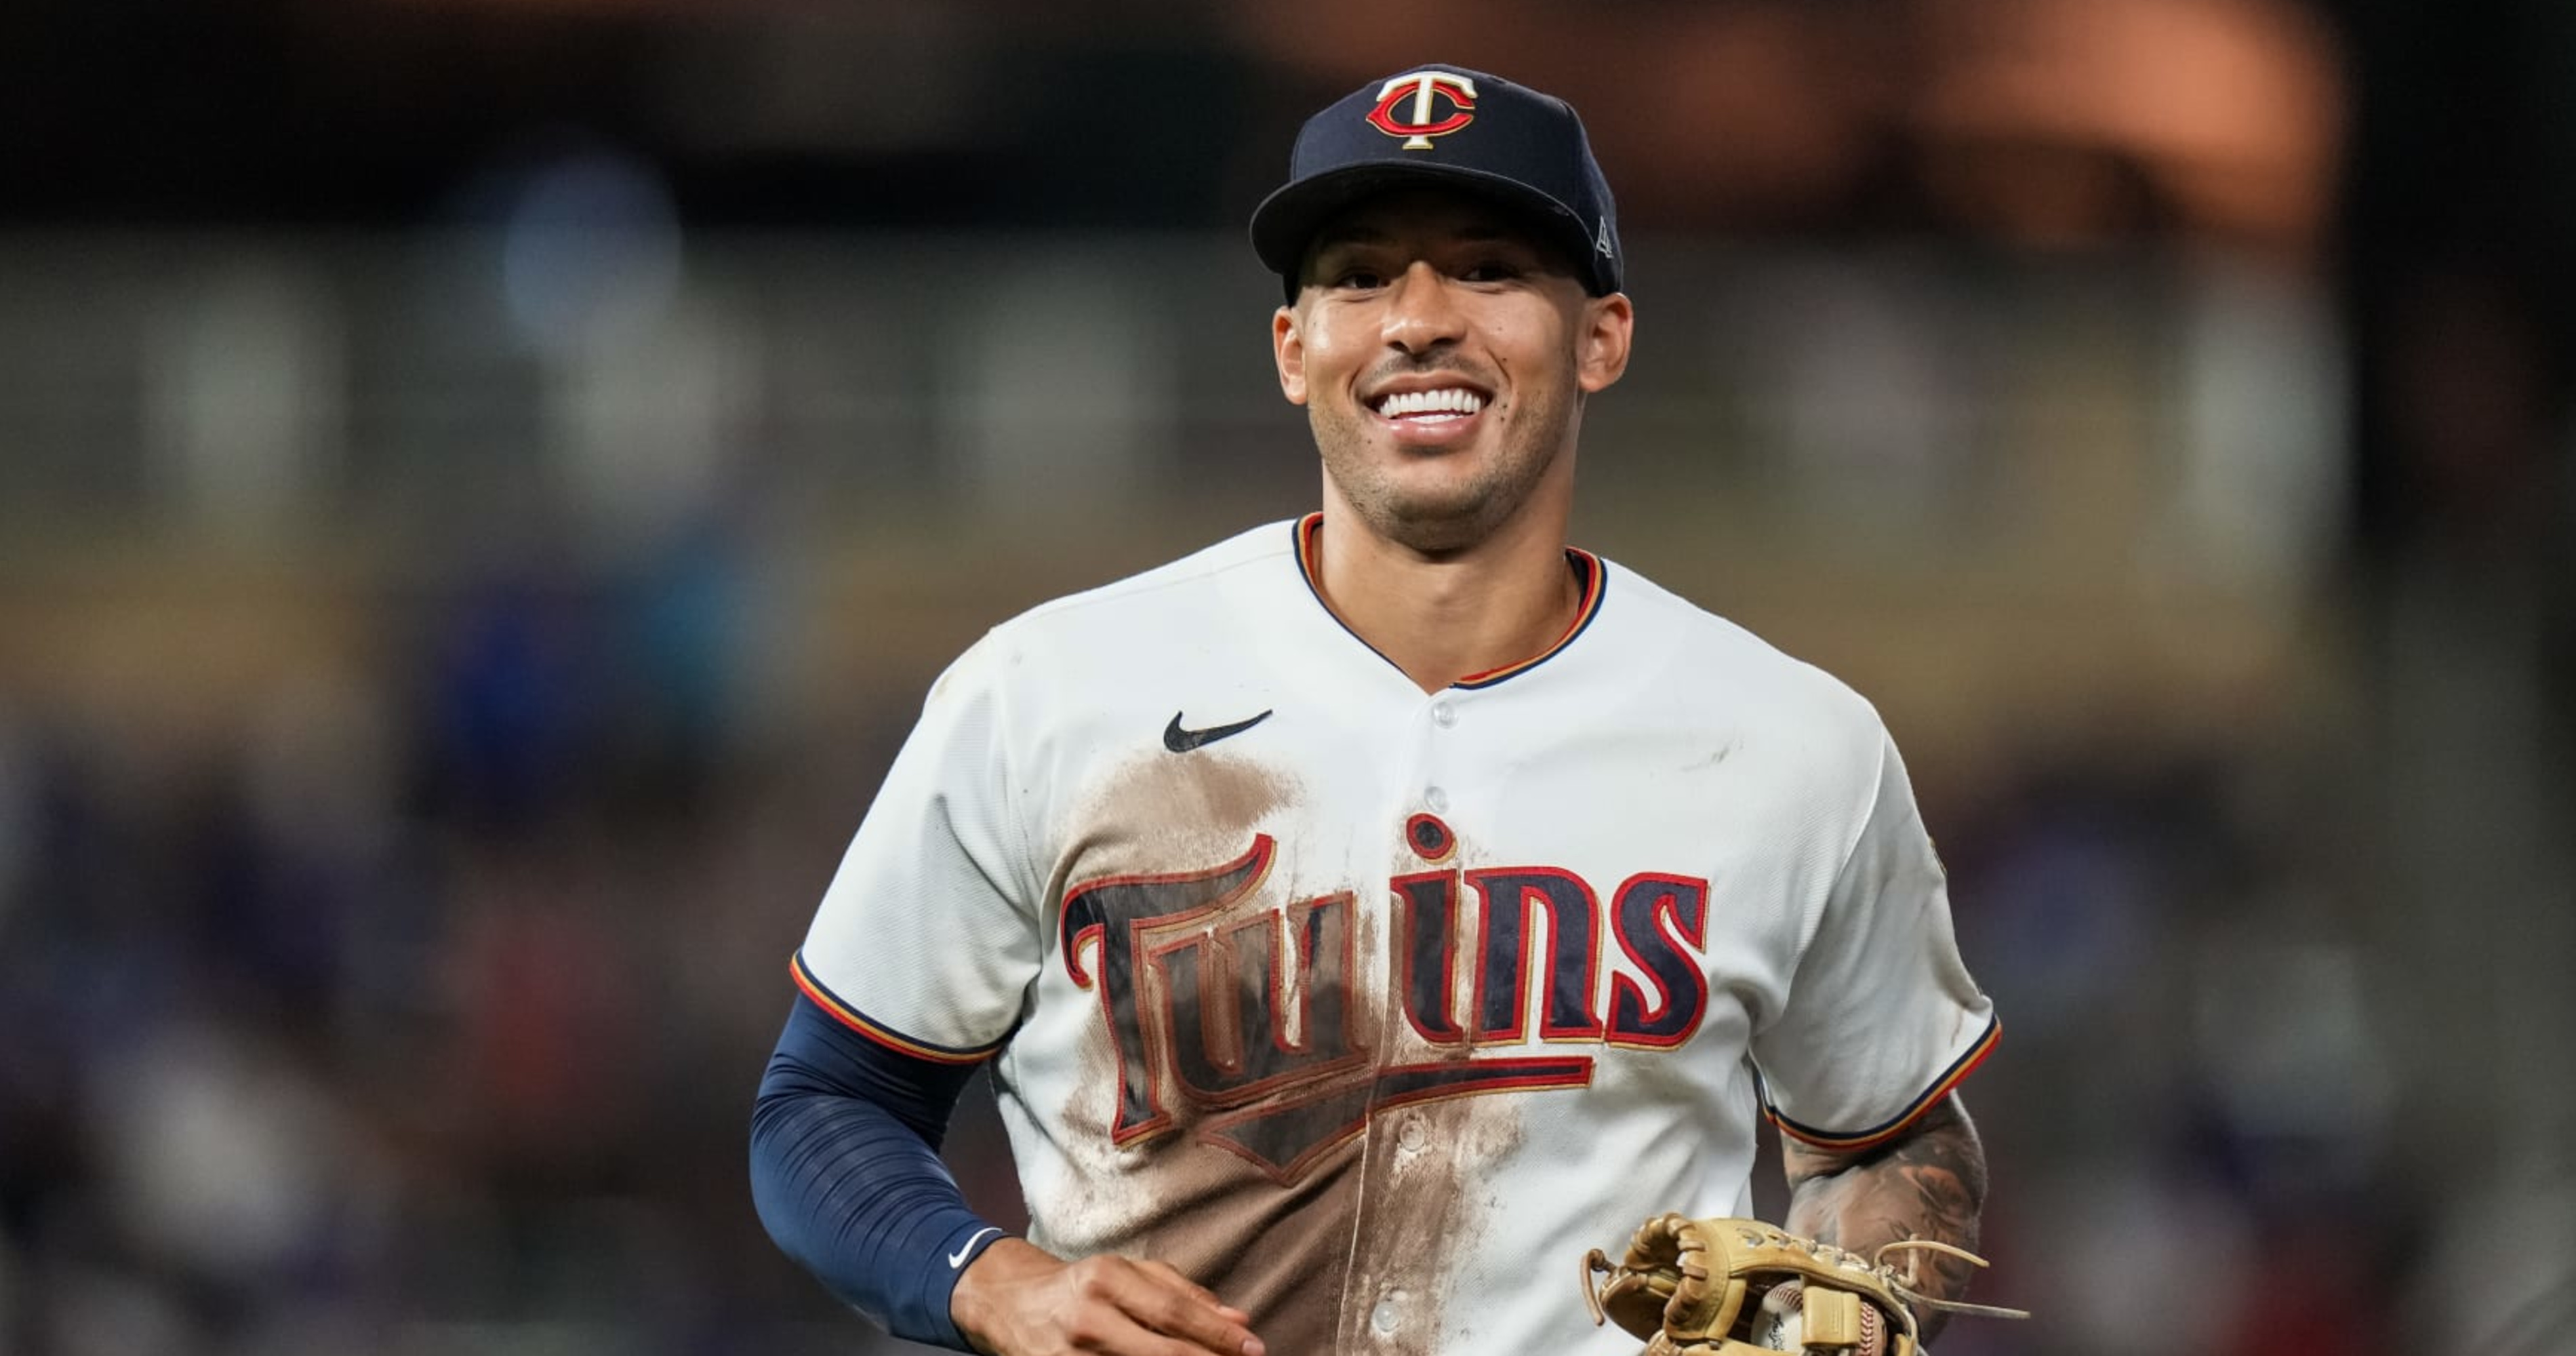 He has the highest standard of excellence': Inside Carlos Correa's